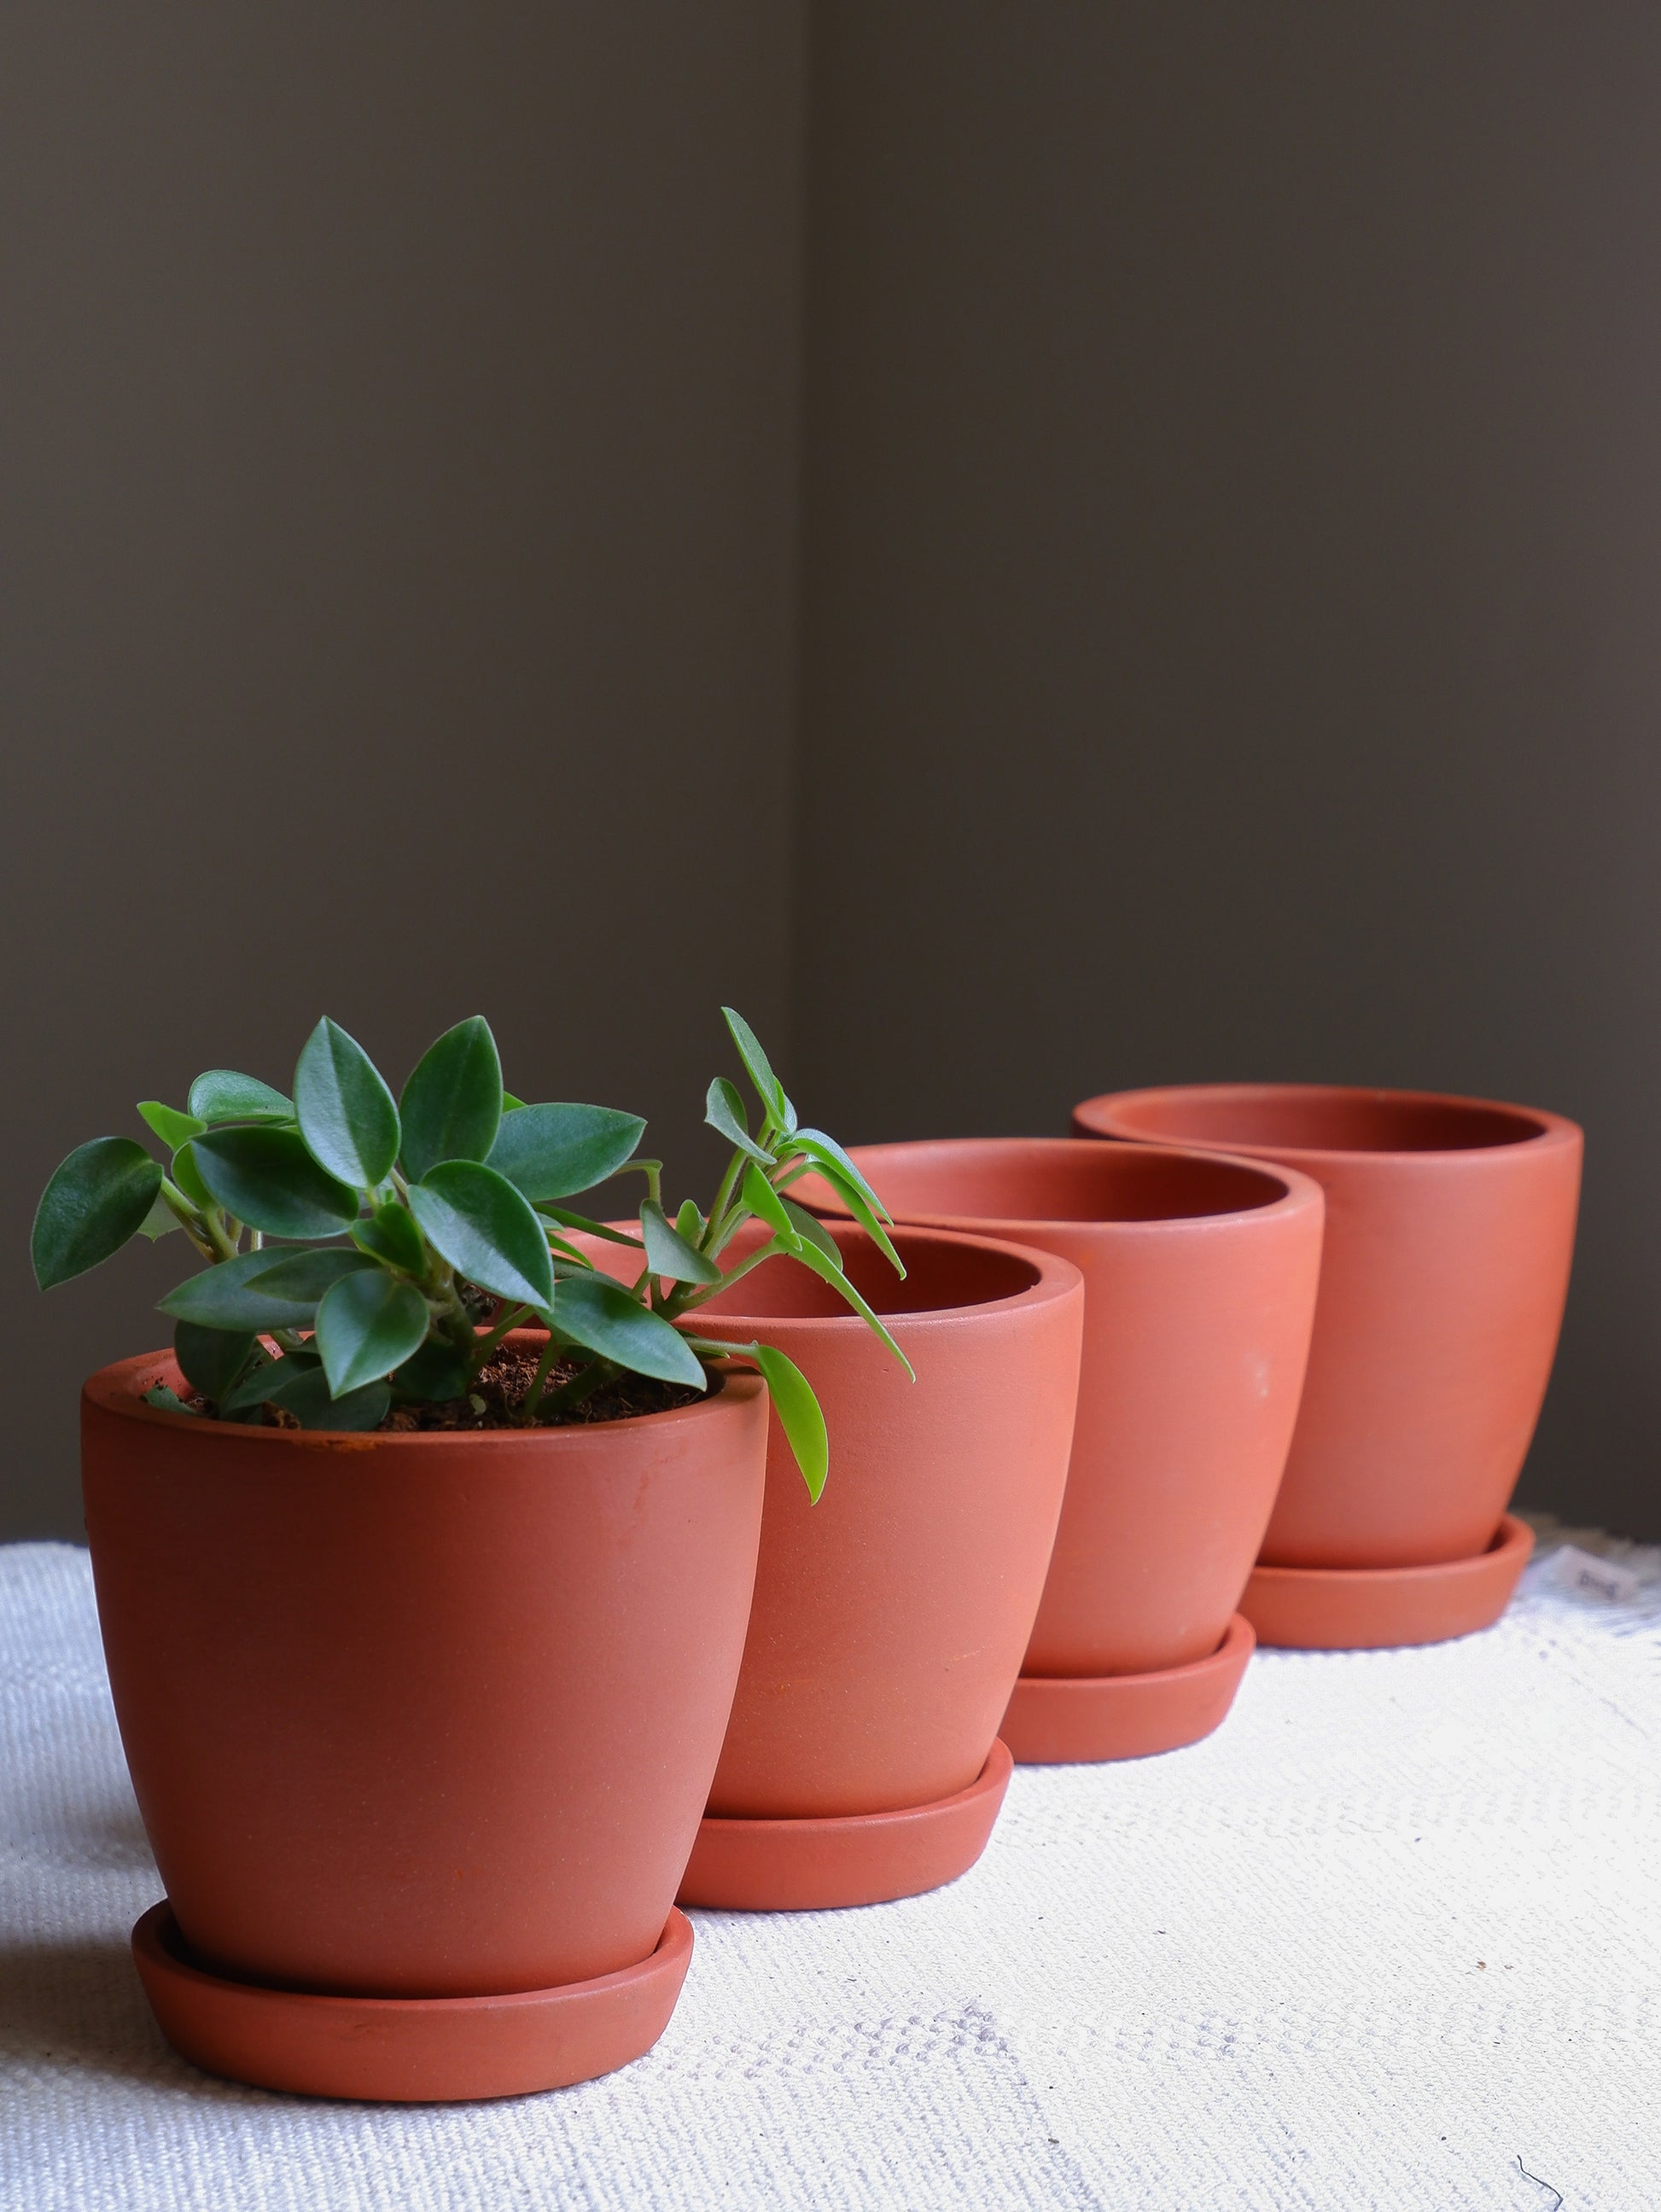 Premium quality Terracotta Clay Pots planters for small tabletop indoor plants, delivered All India